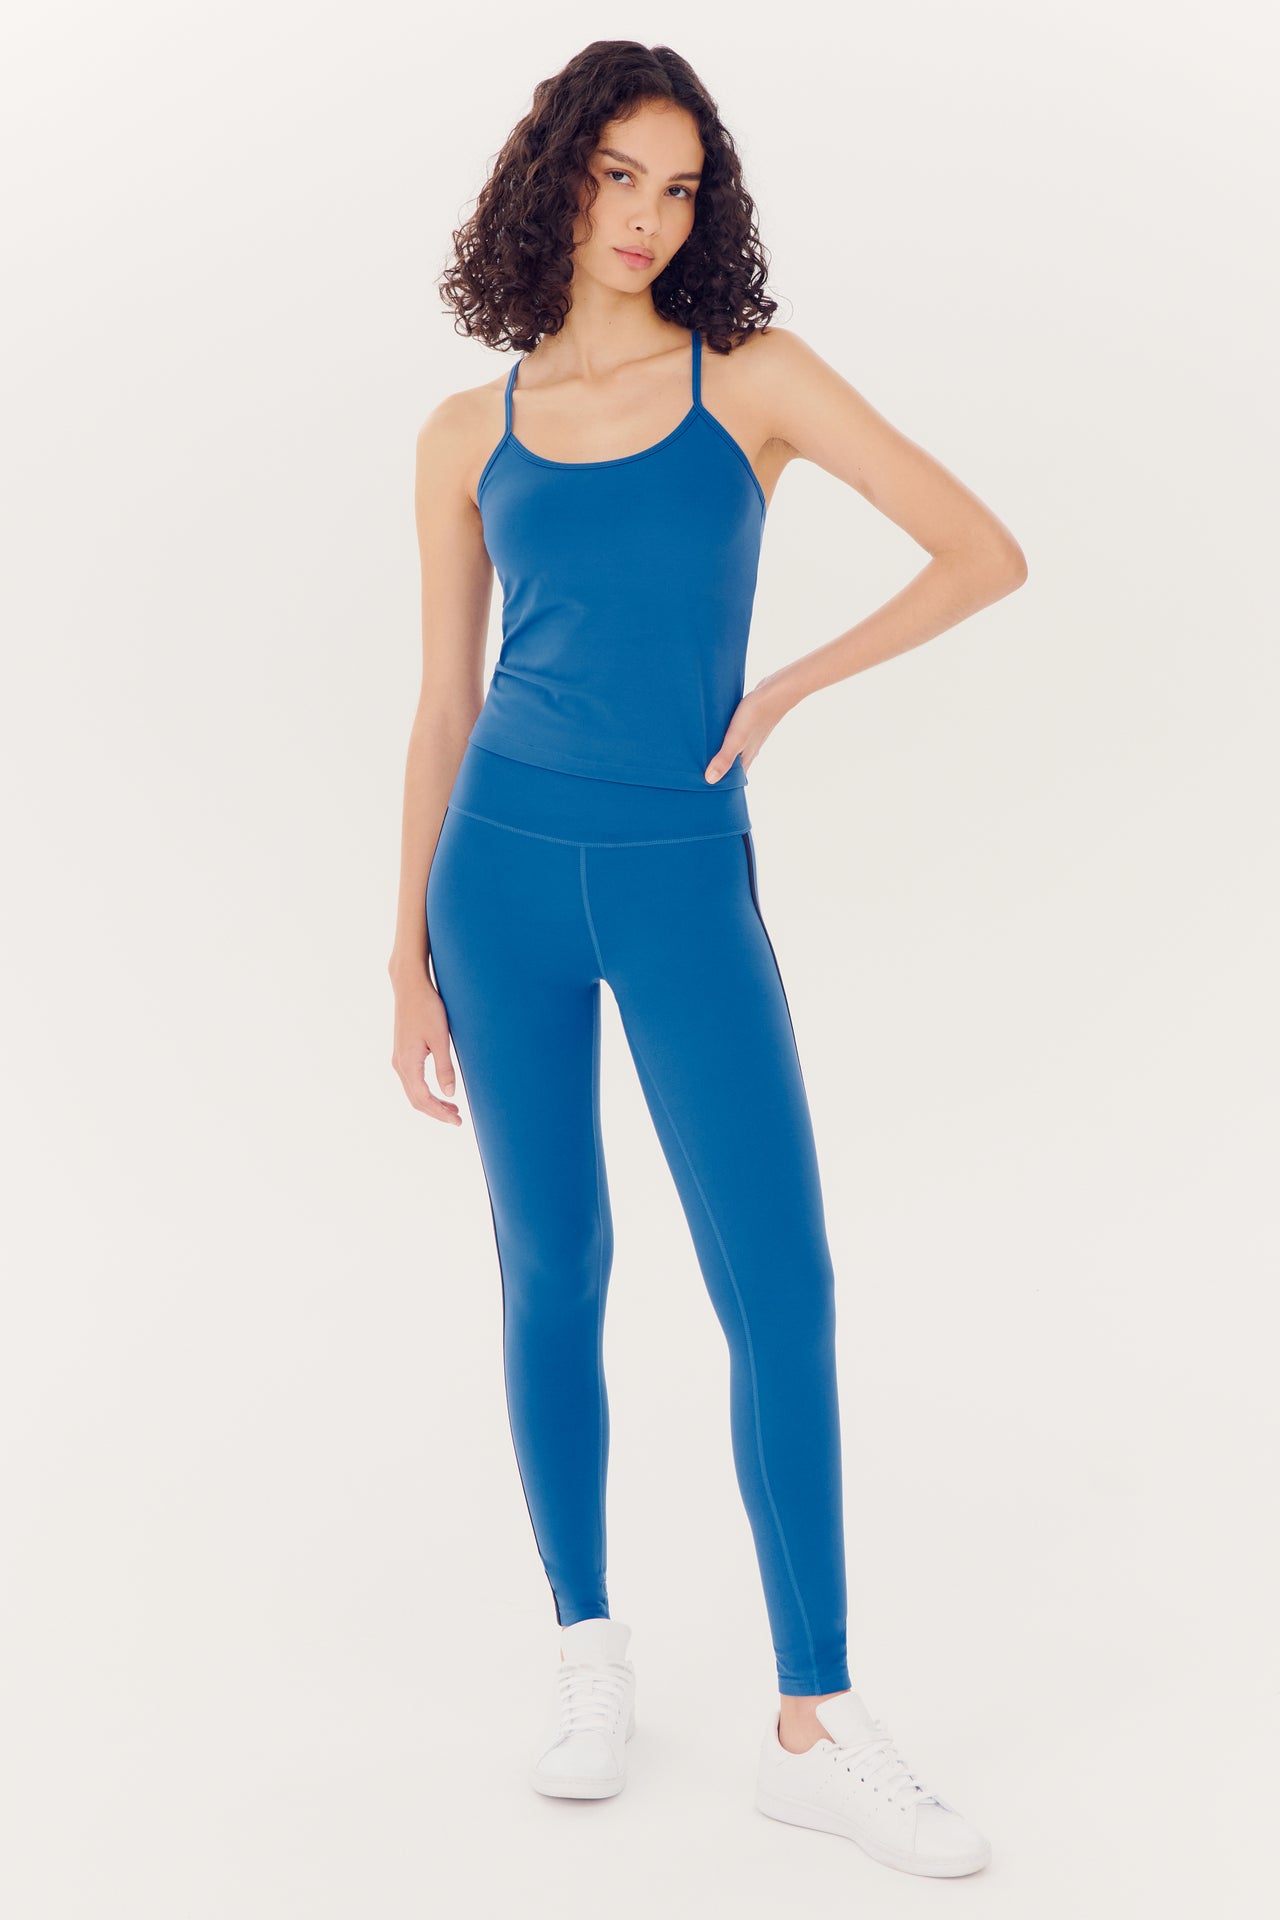 A woman wearing SPLITS59's Ella High Waist Airweight 7/8 leggings in Stone Blue/Indigo and a blue tank top stands against a white background, providing an accurate response.